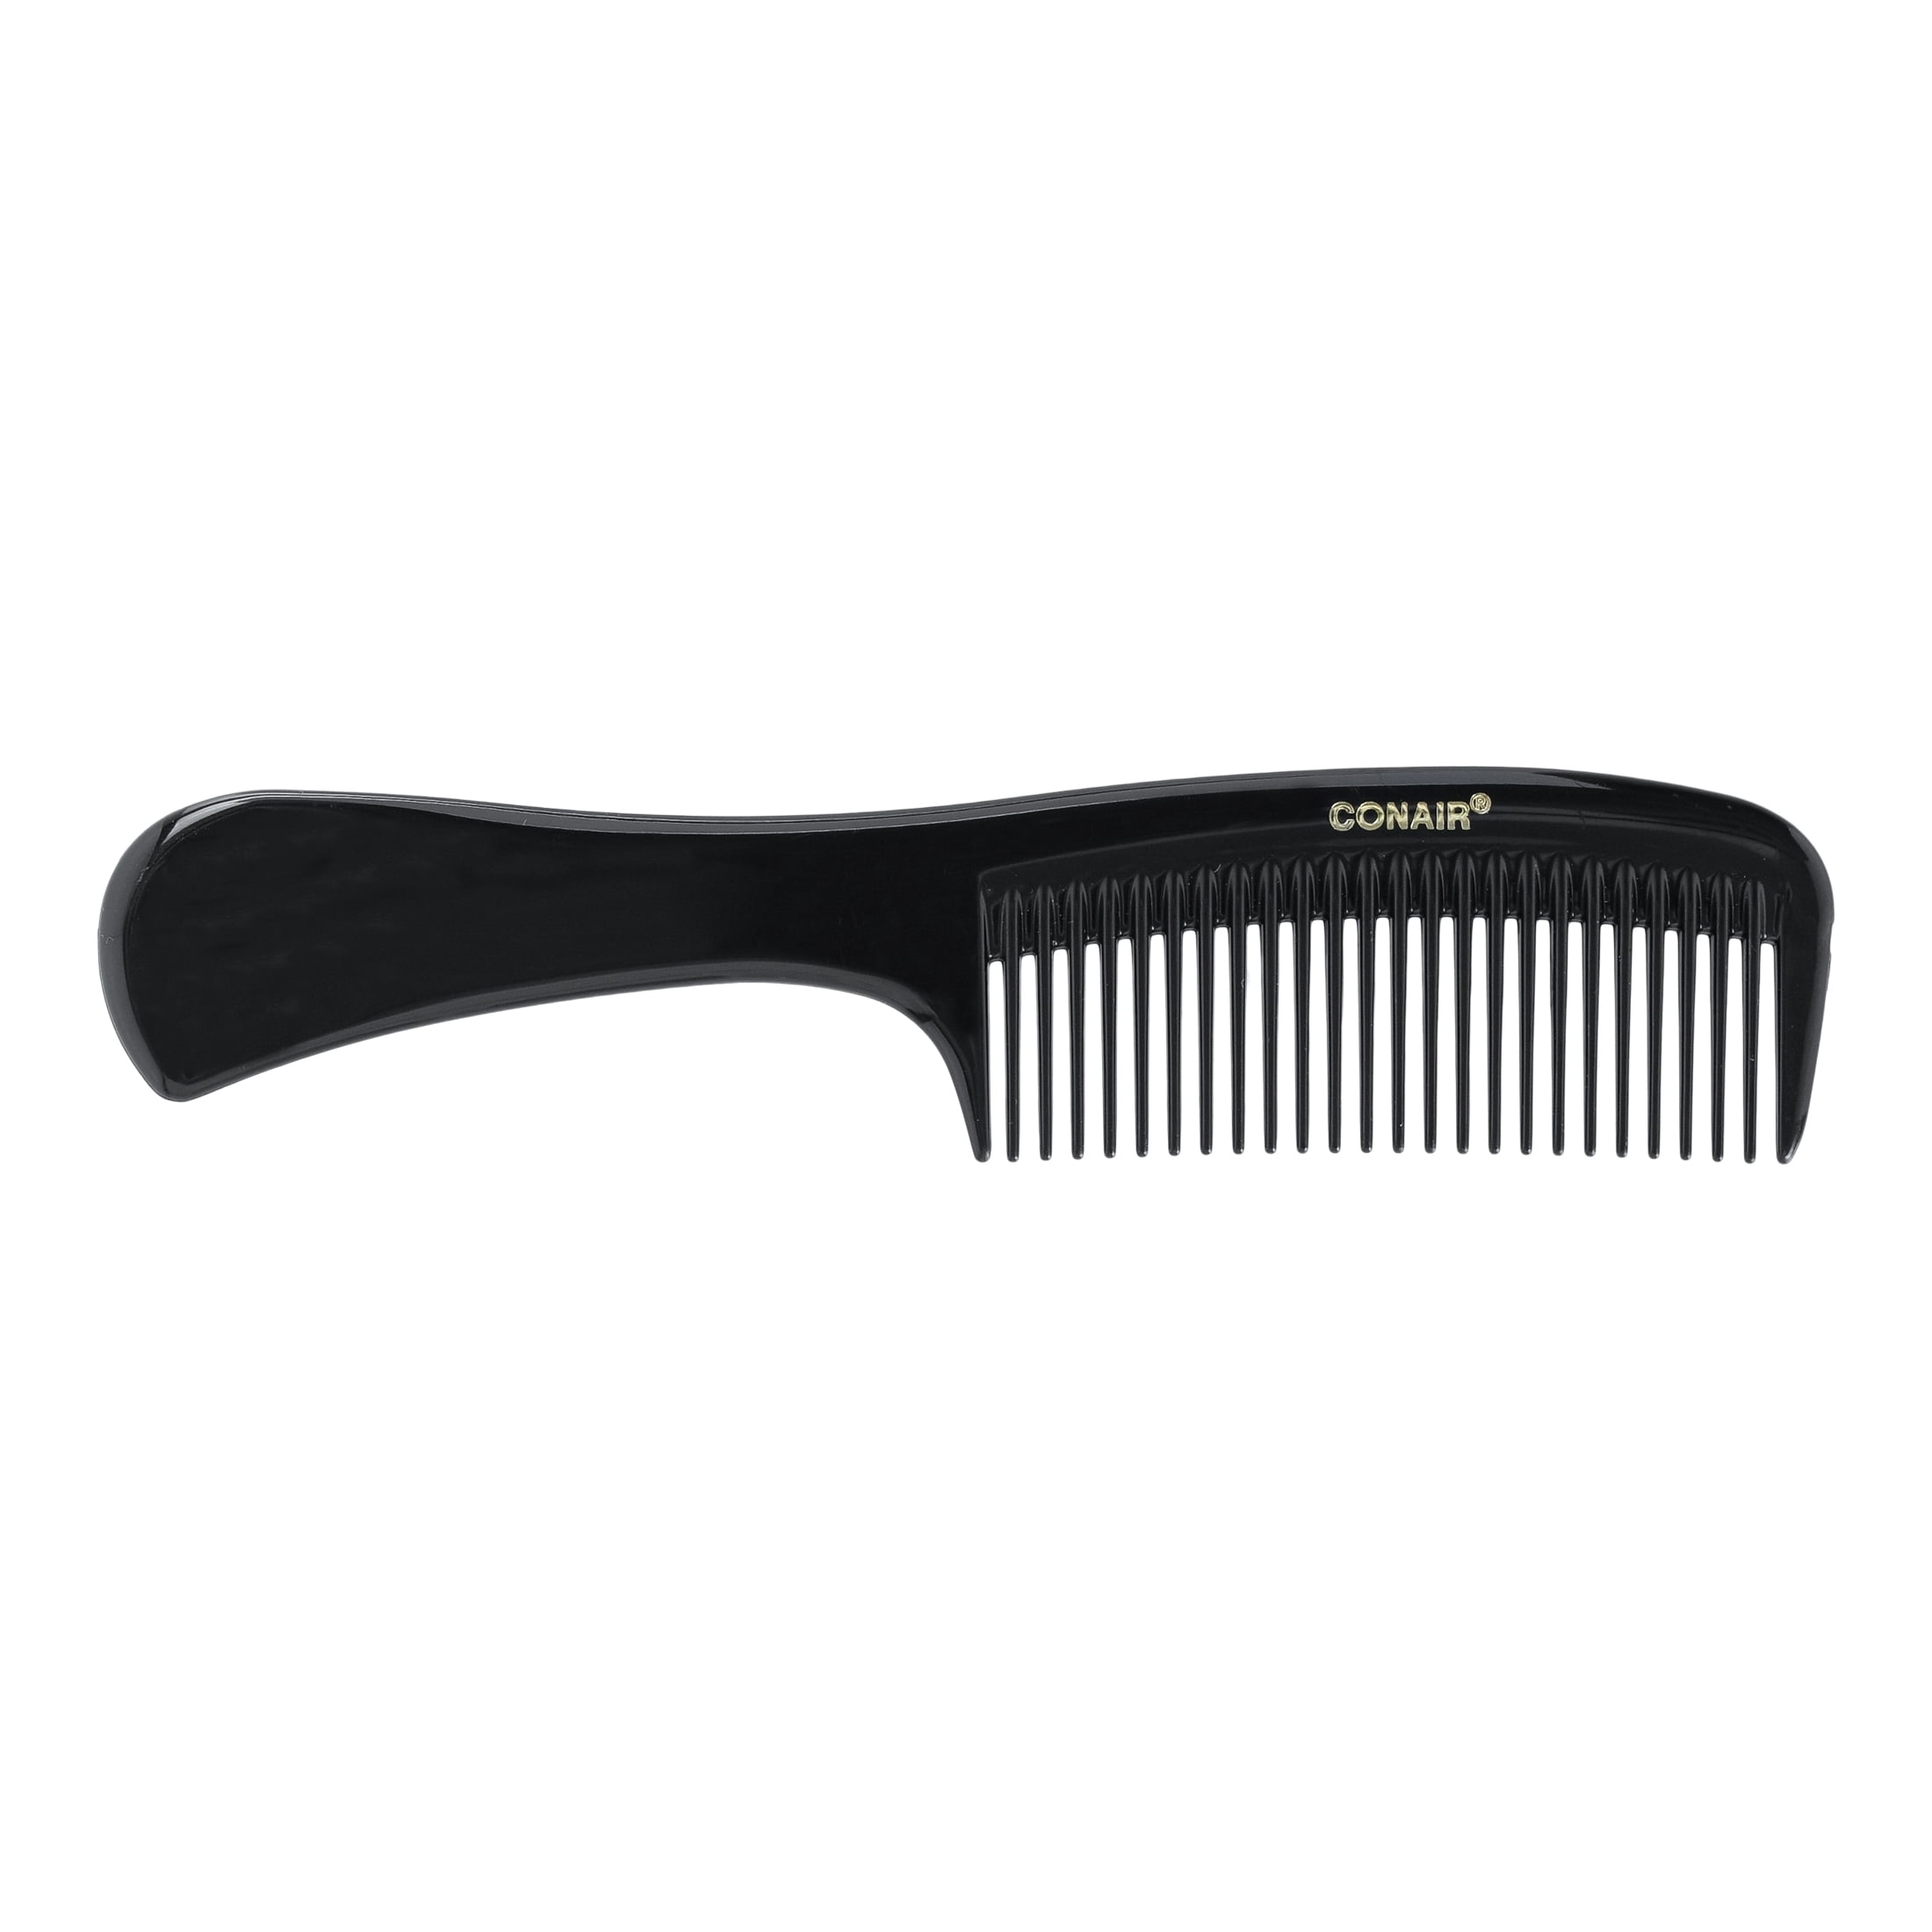 Conair Classic Styling Essential Compact Comb with Handle in Black, 1 ct